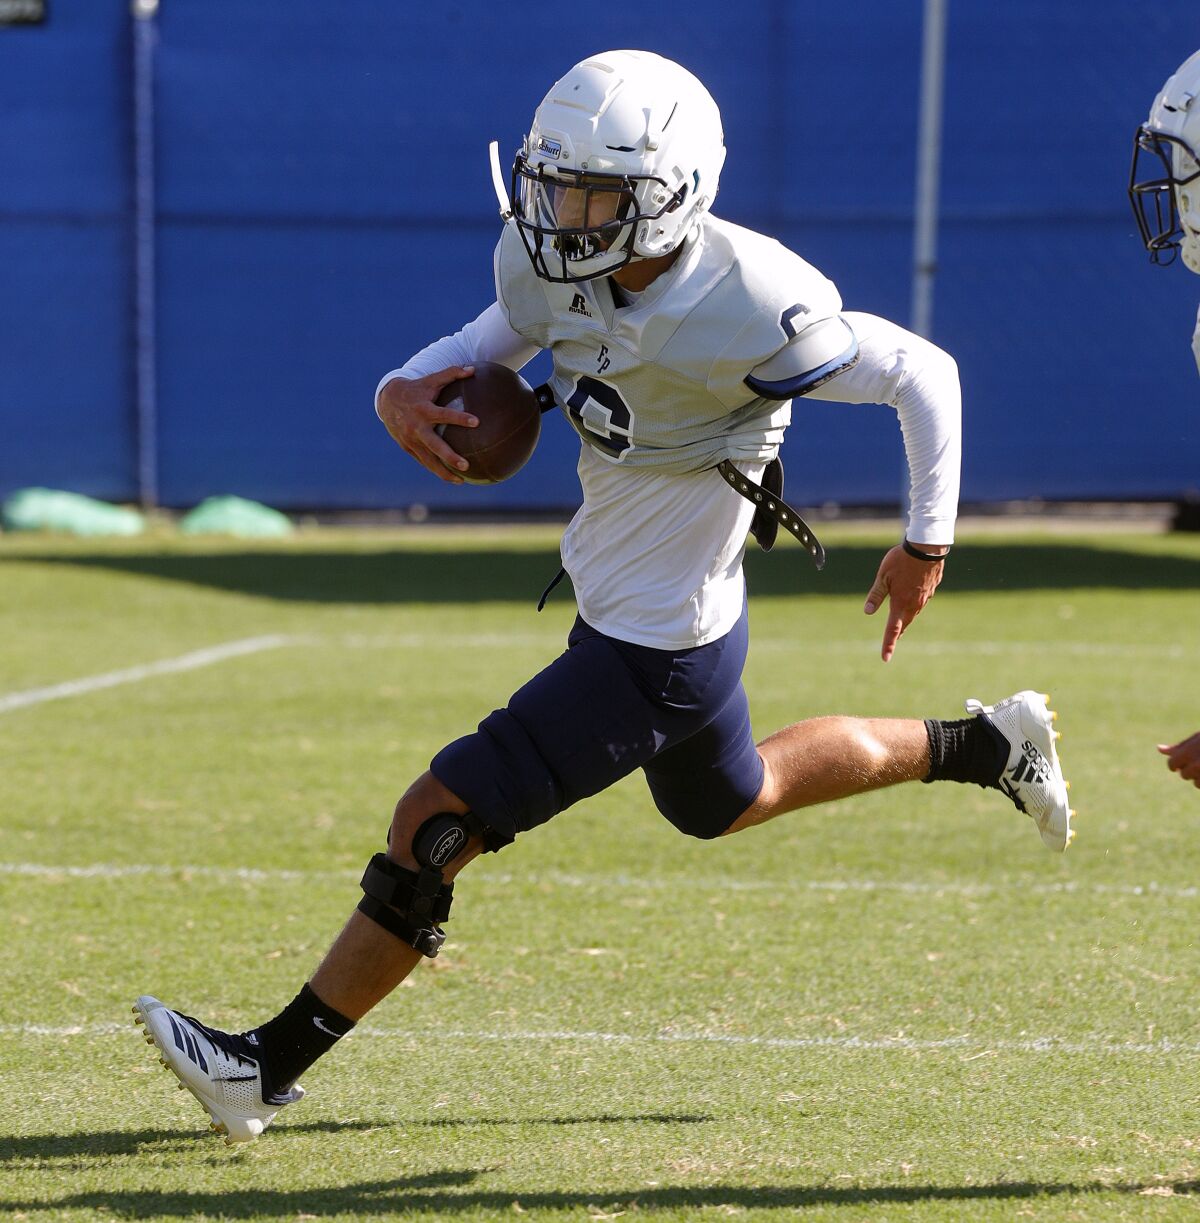 Flintridge Prep's Tommy Porter carries the ball on a run while practicing play at pre-season football practice at Flintridge Prep on Monday, August 19, 2019.